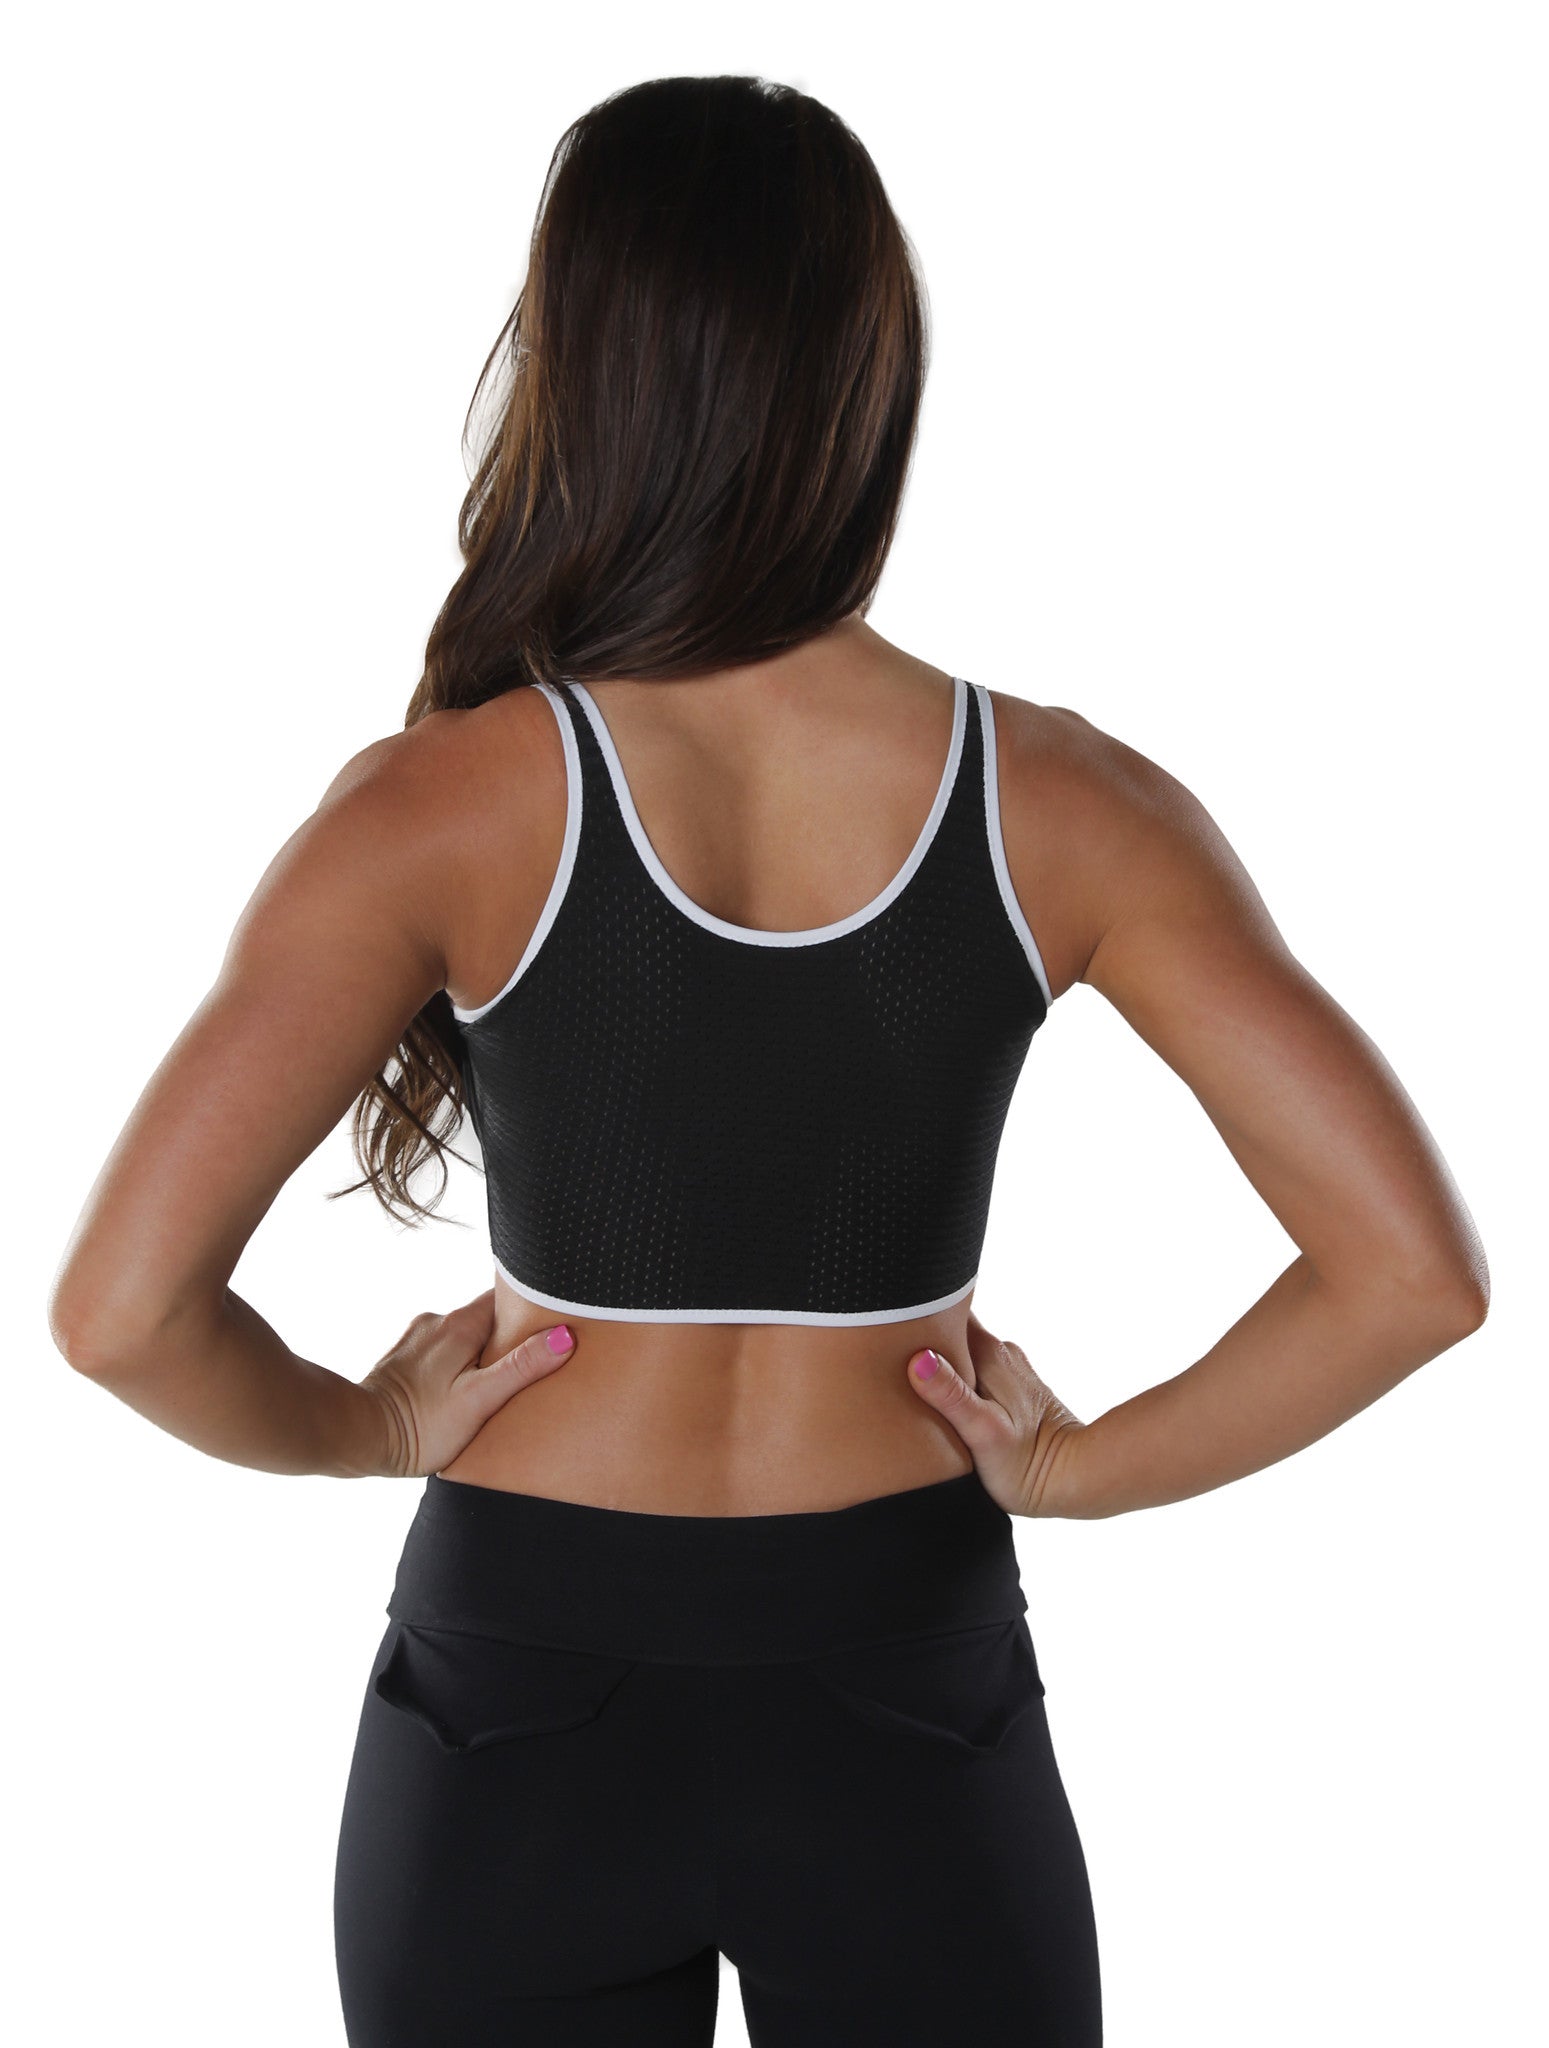 Perfect sports bra for any kind of activity  You are fully supported when  you need to minimize bounce - Shapeez - Theme Dev